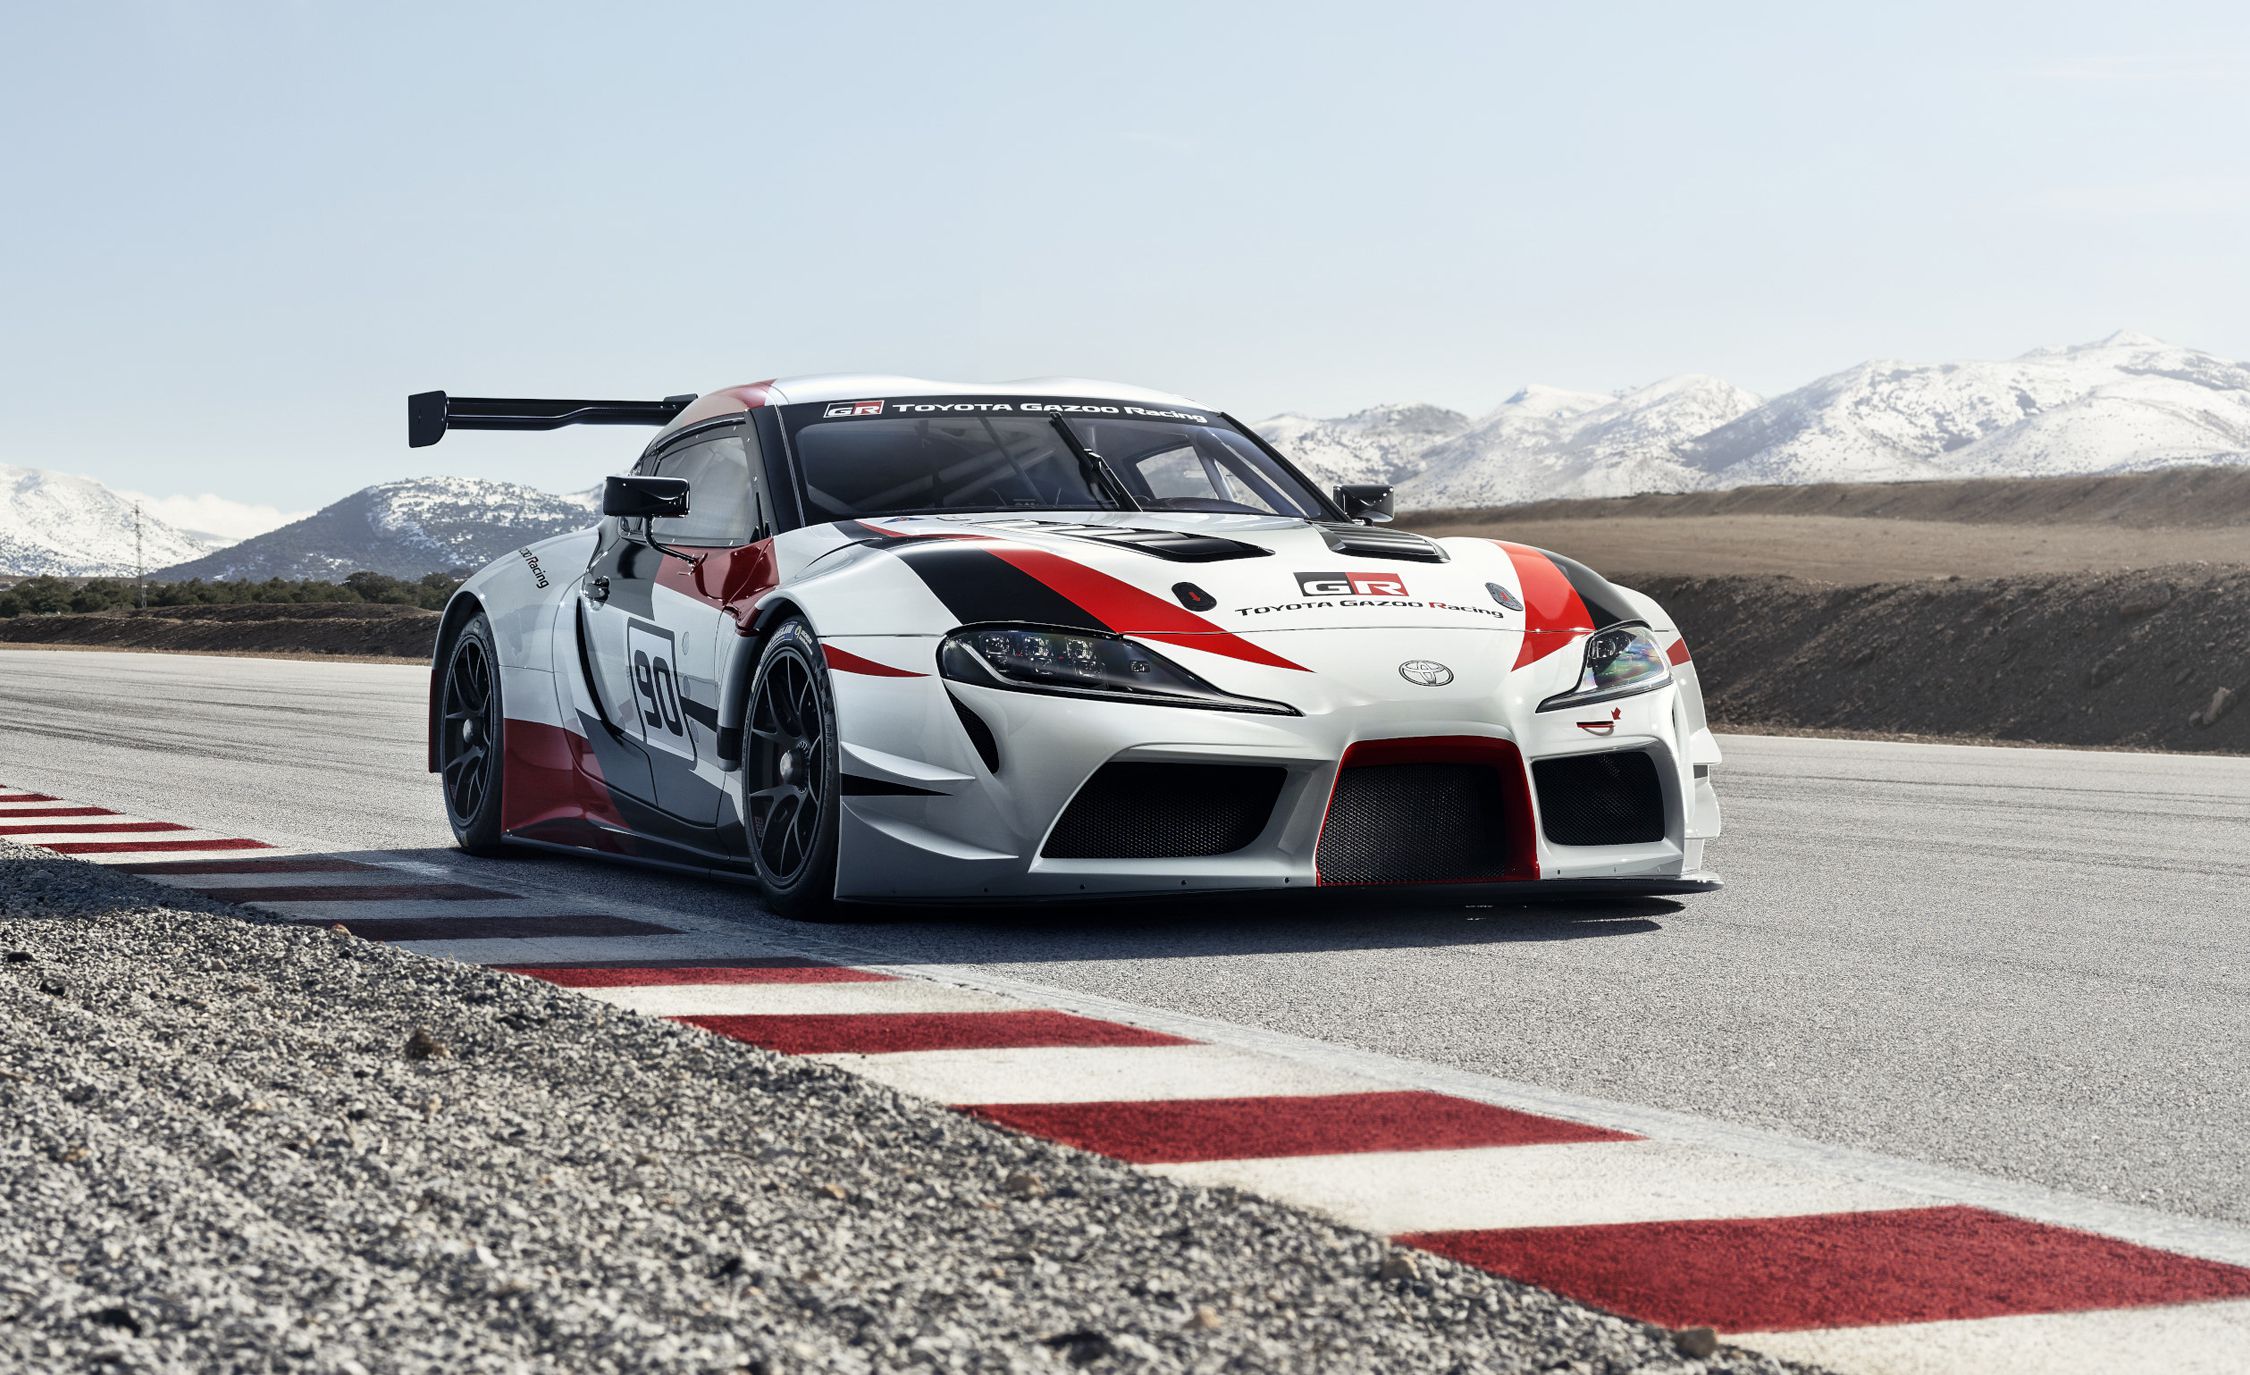 toyota-gr-supra-racing-concept-the-supra-is-officially-back-news-car-and-driver-photo-703835-s-original.jpg